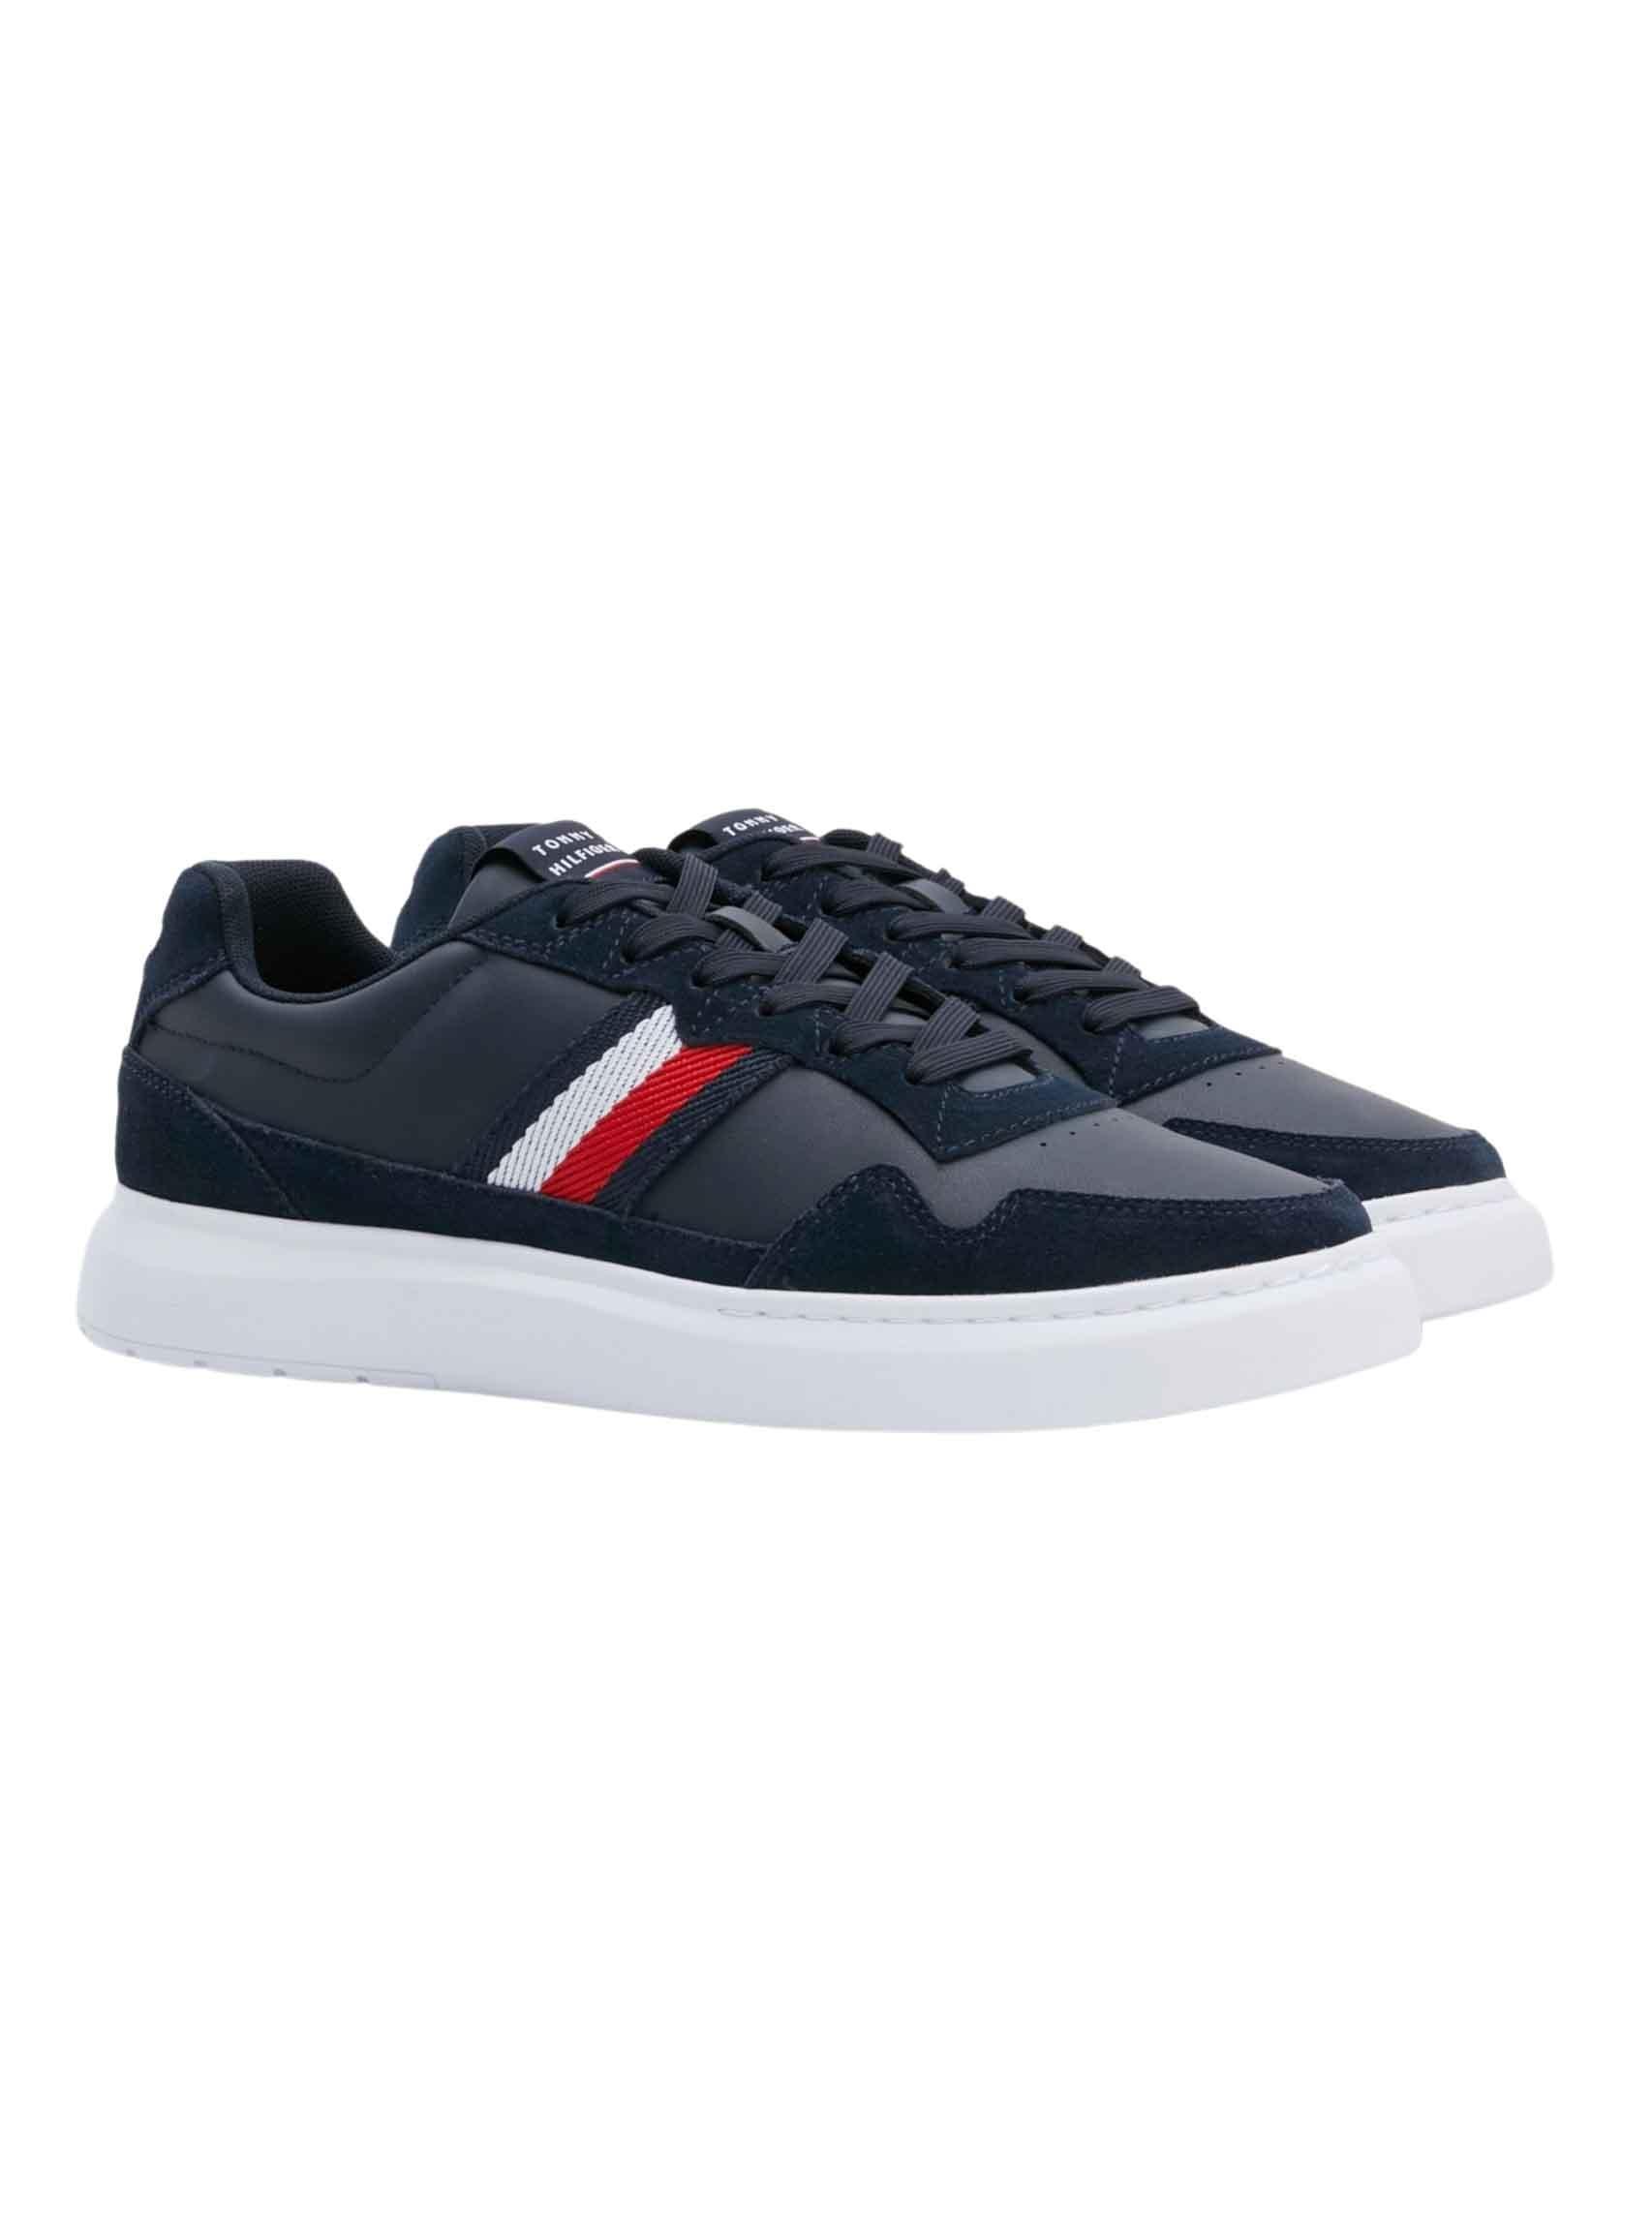 Sneakers Tommy Hilfiger Mix Cup Blu Navy Uomo